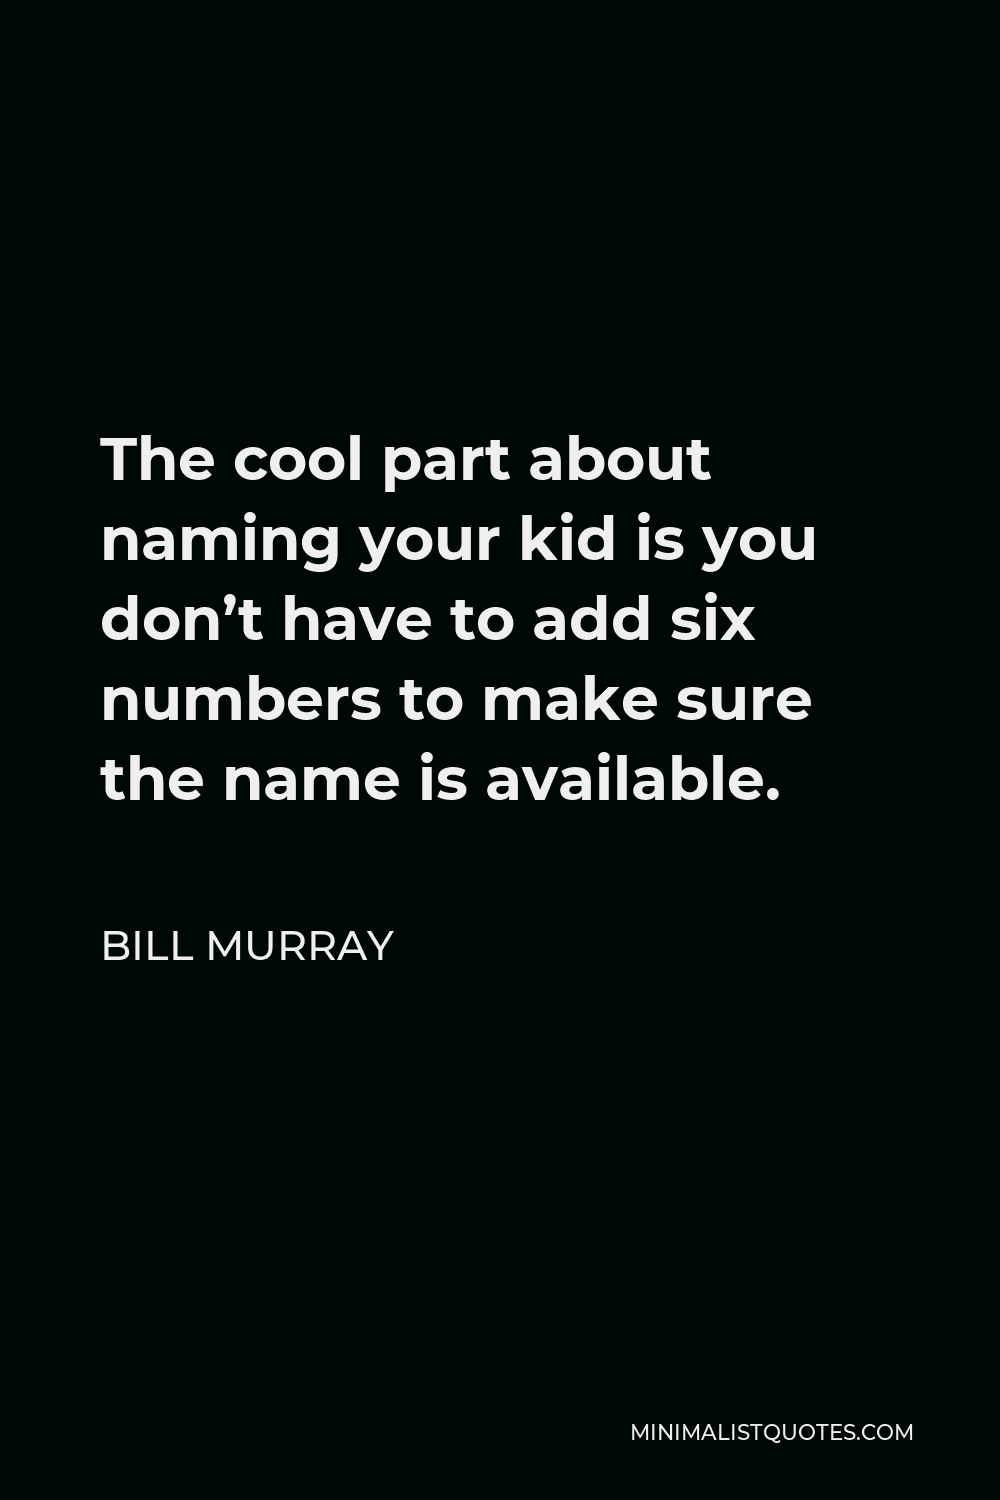 Bill Murray Quote - The cool part about naming your kid is you don’t have to add six numbers to make sure the name is available.